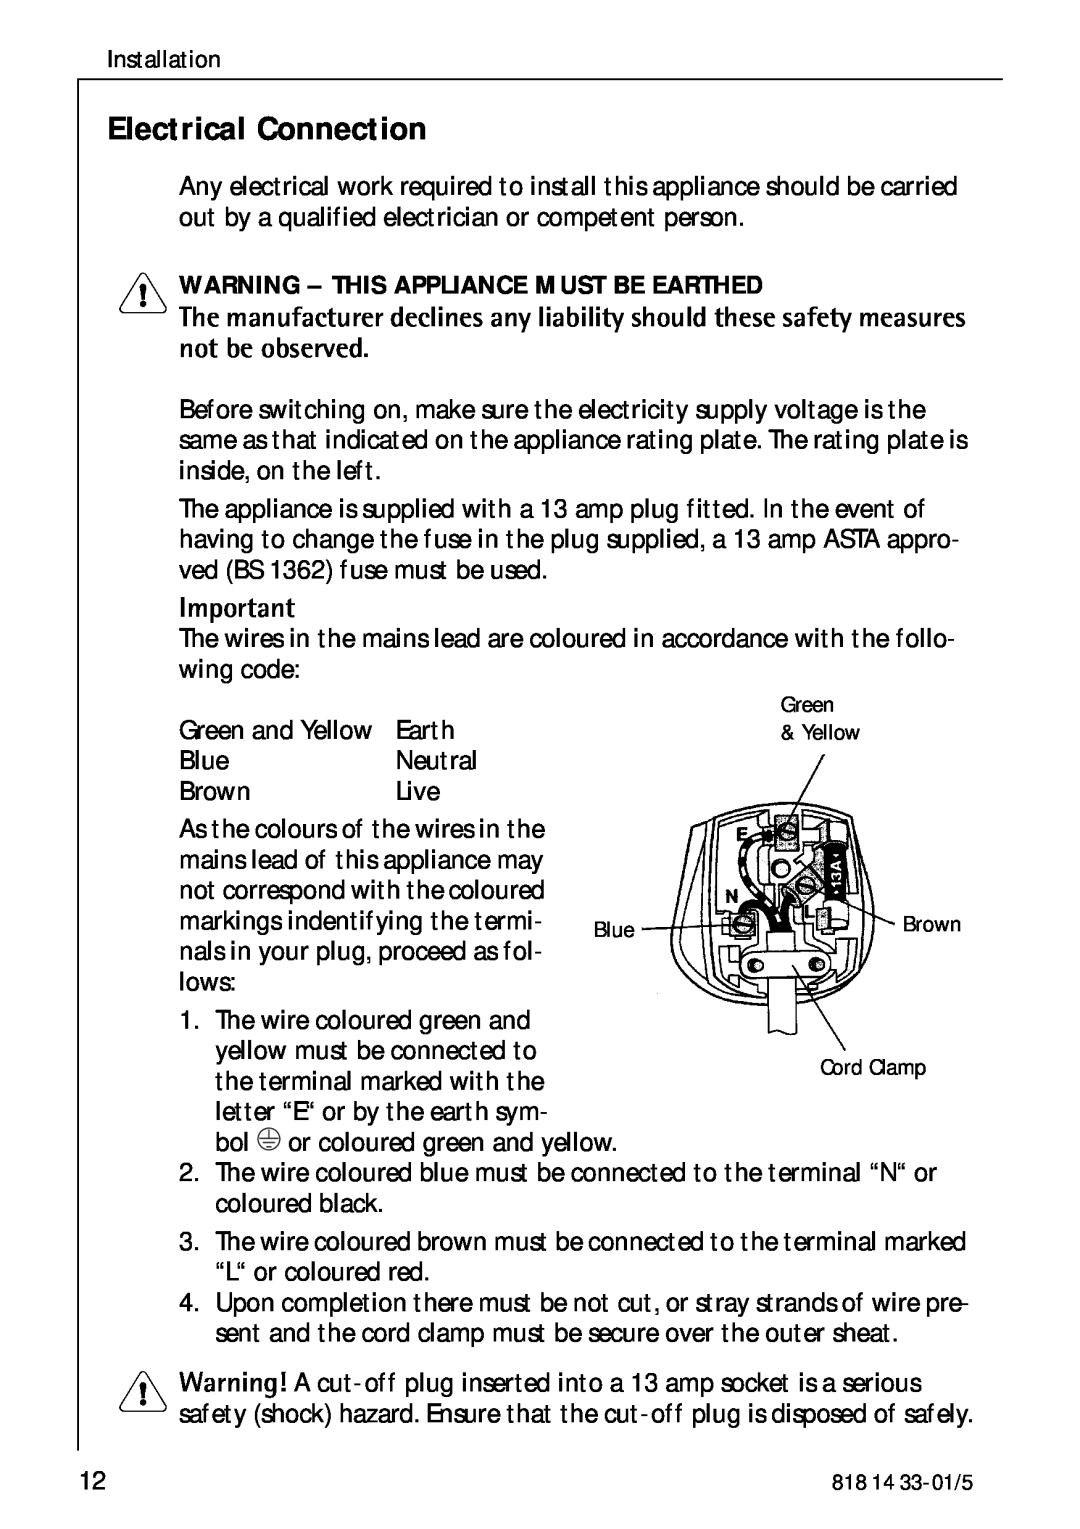 AEG 2150-6GS manual Electrical Connection, Warning - This Appliance Must Be Earthed 